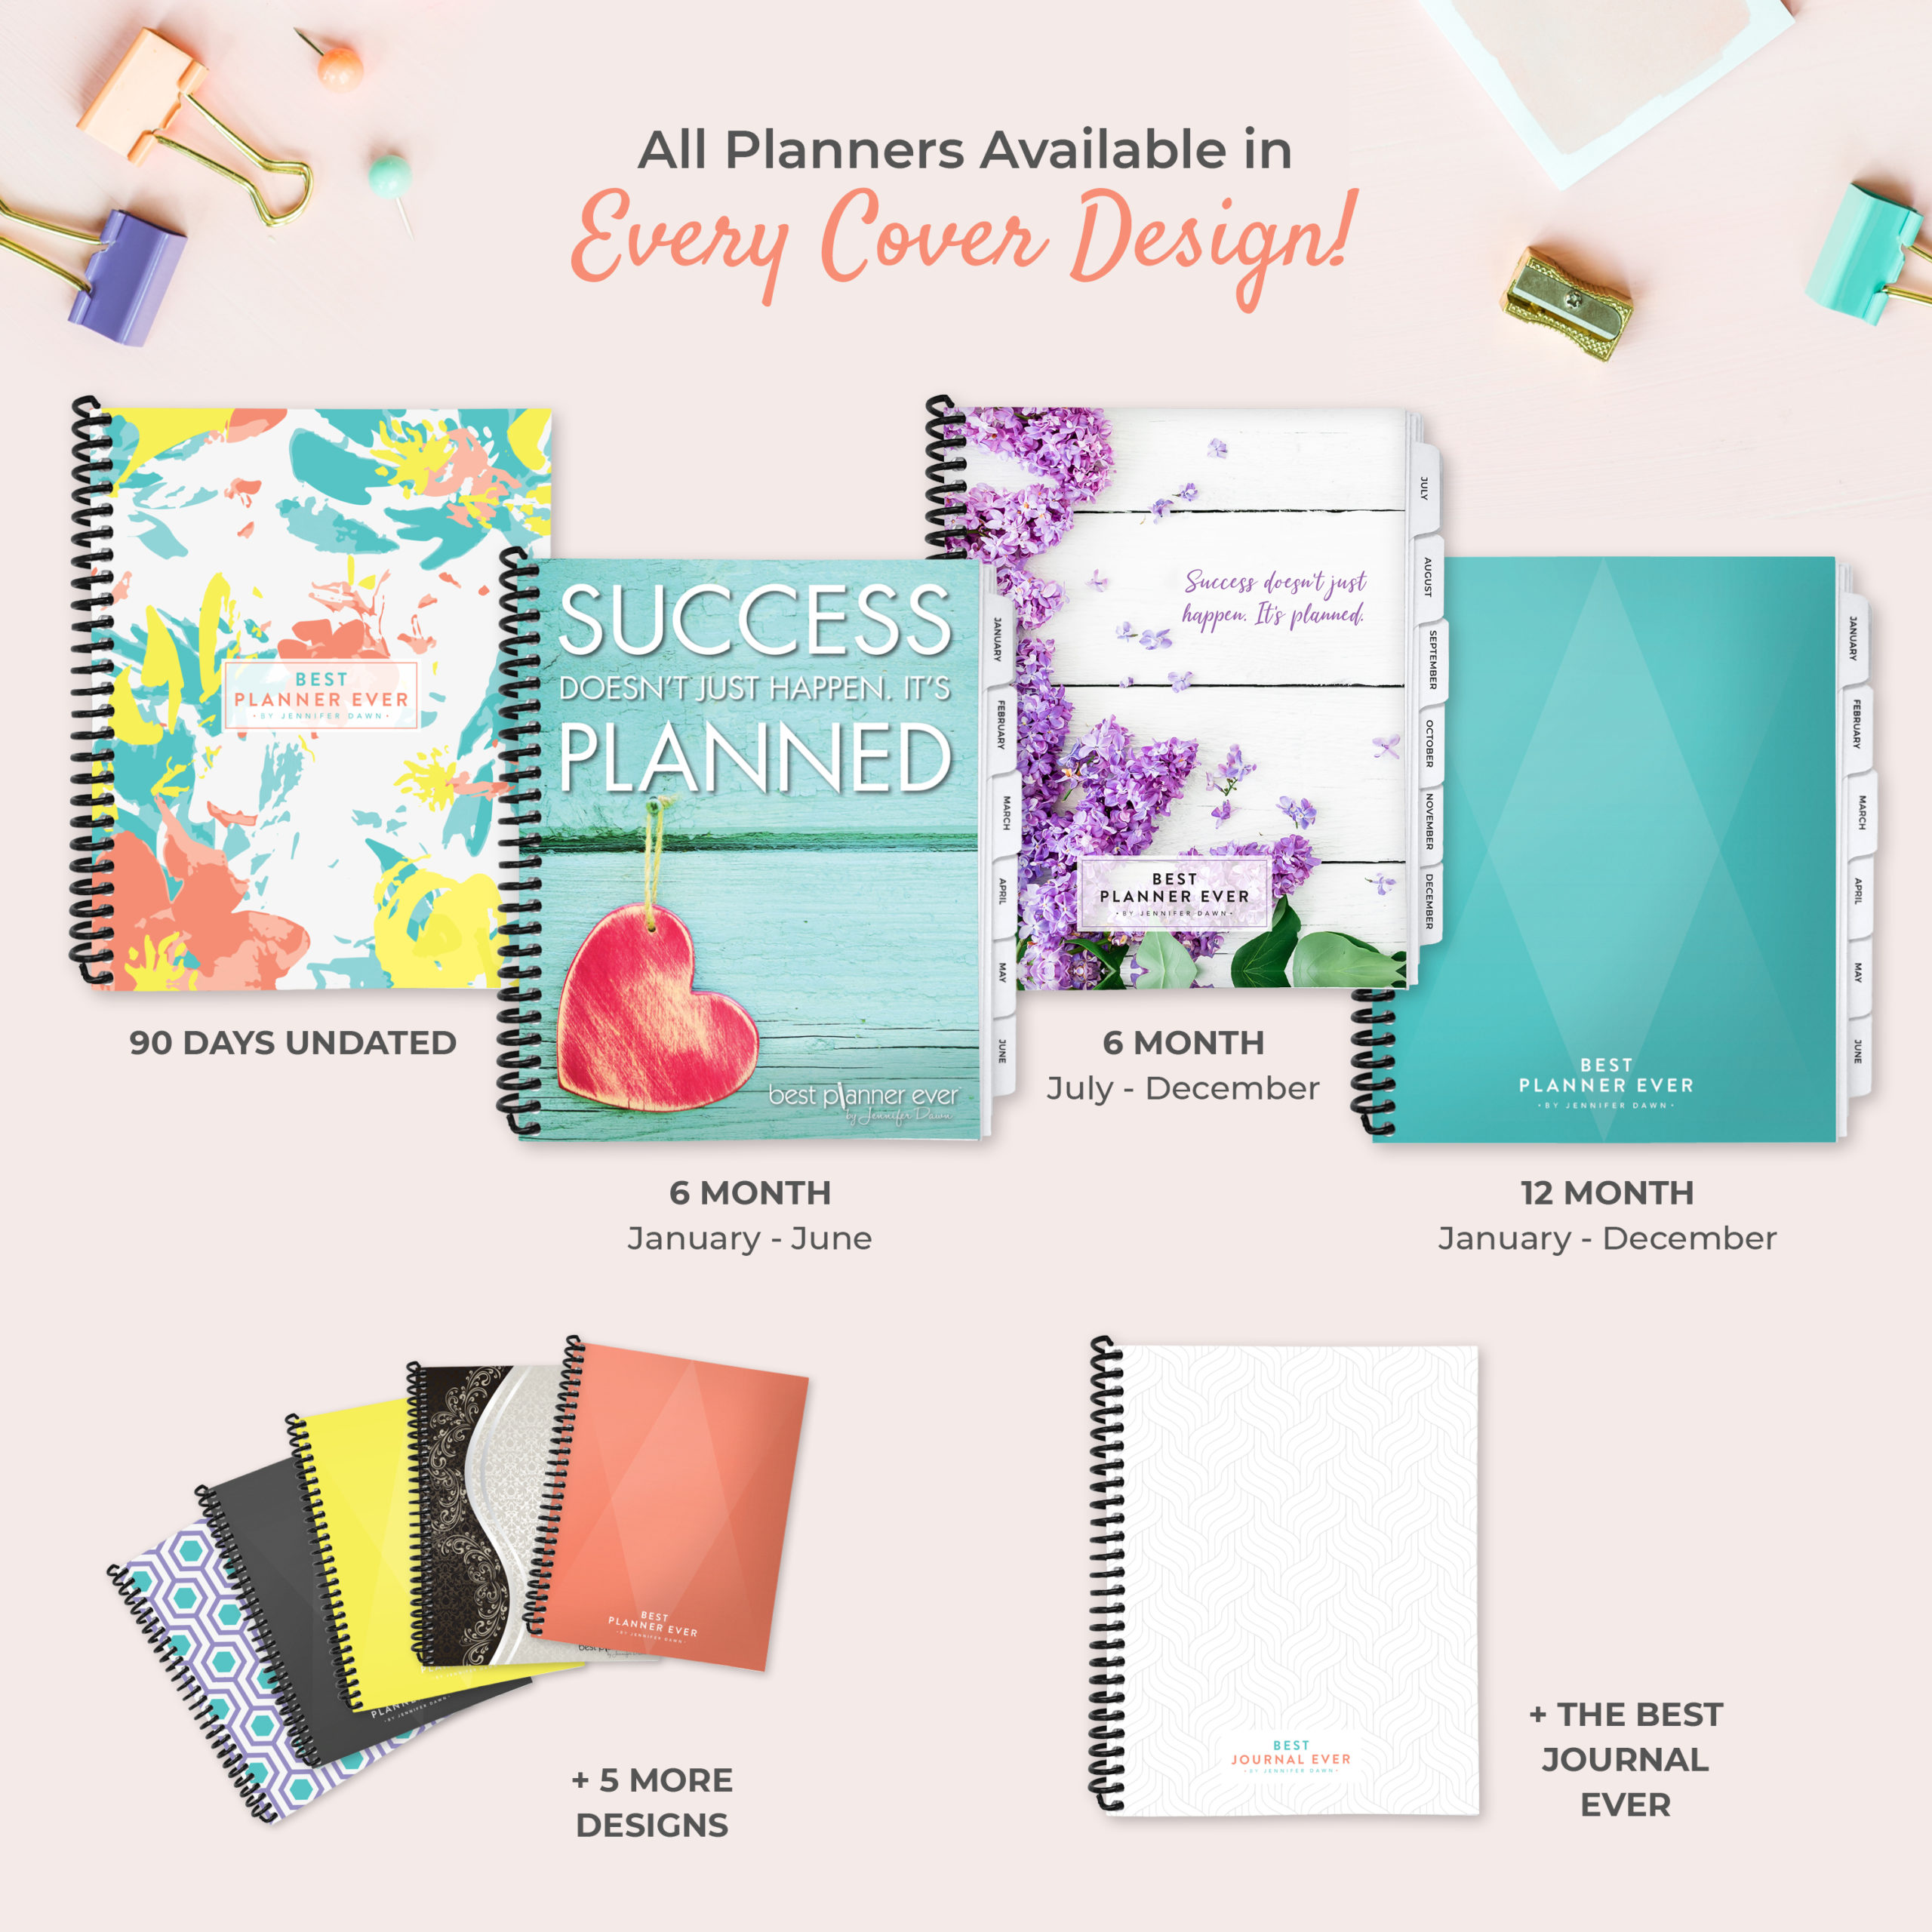 Best Planner Ever Daily Planner – 12 MONTH